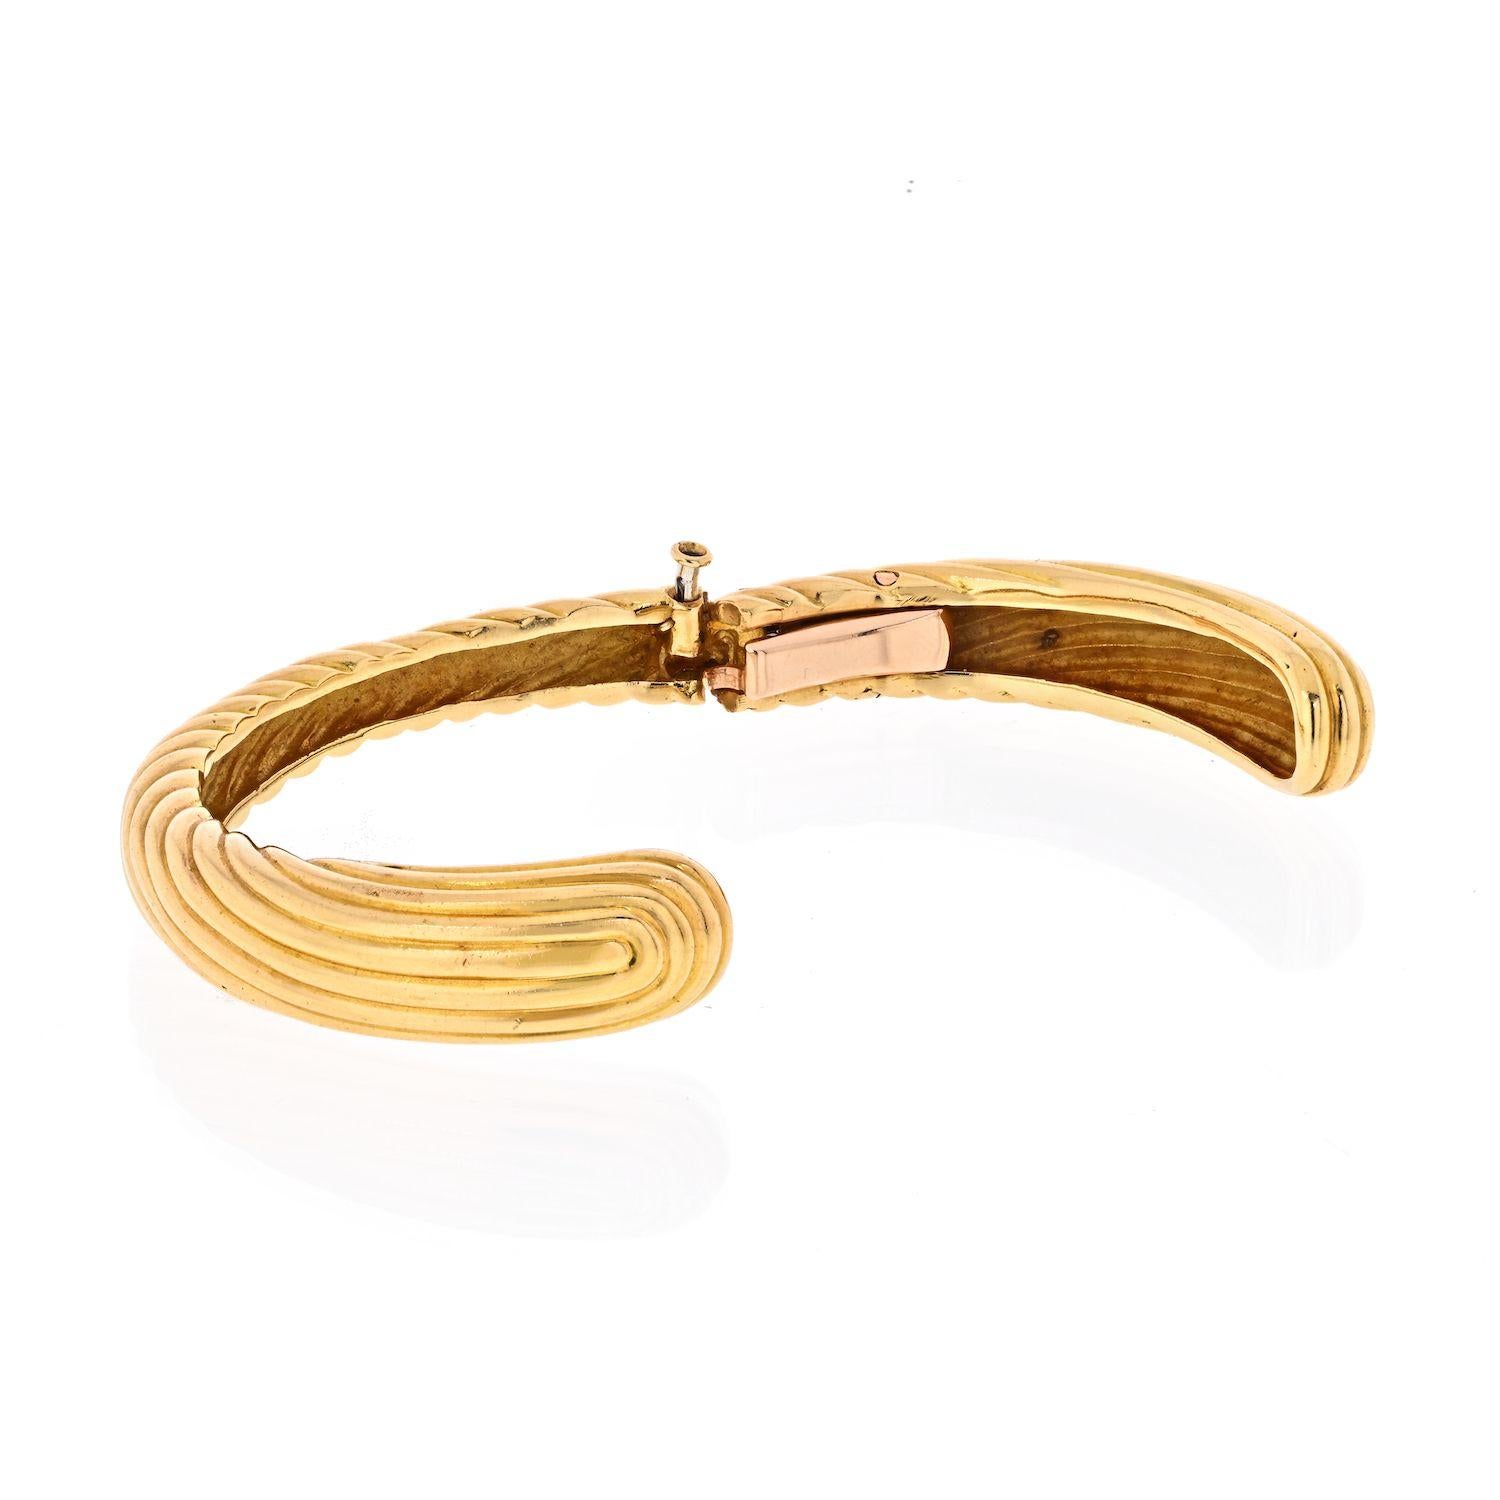 Made by Van Cleef & Arpels in 18K Yellow Gold this beautiful high polished ribbed finish hinged cuff is a perfect fit for your out and about. 
Wrist size 6 to 6.25 this is  bracelet to stack with your other favorites. 
Gift this lovely bracelet by